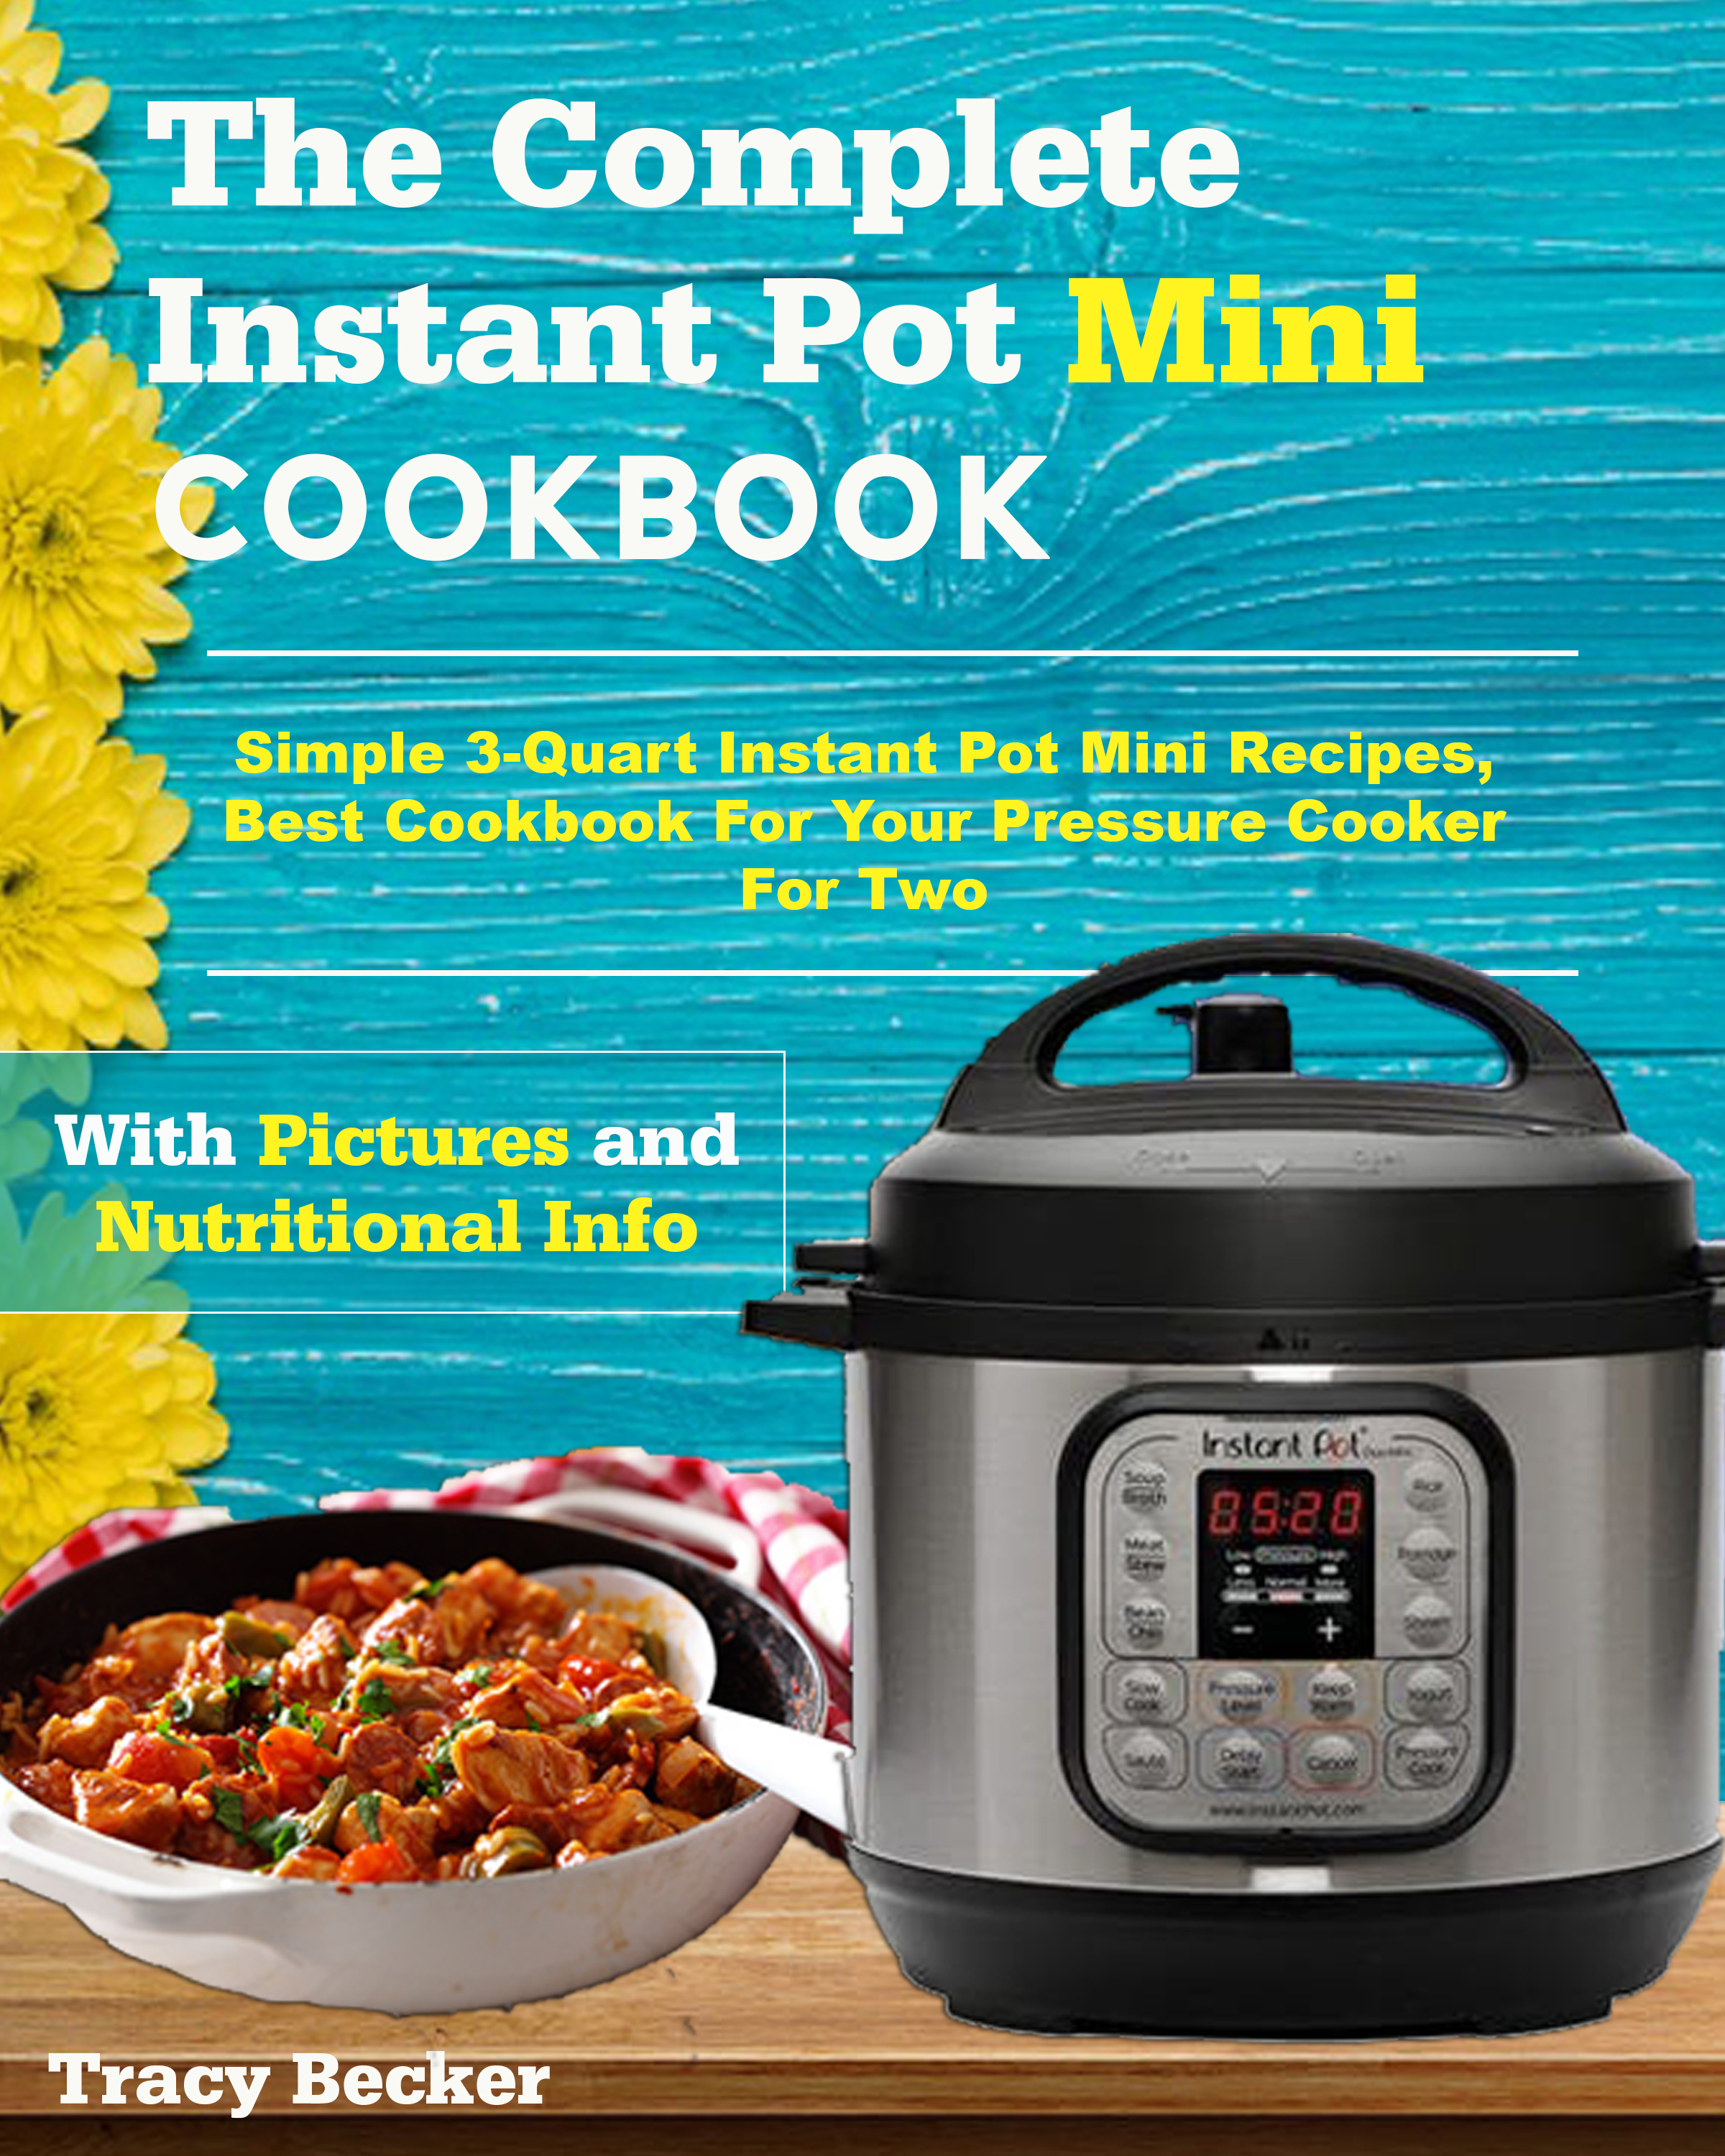 FREE: The Complete Instant Pot Mini Cookbook: Simple 3-Quart Instant Pot Mini Recipes, Best Cookbook For Your Pressure Cooker For Two by Tracy Becker